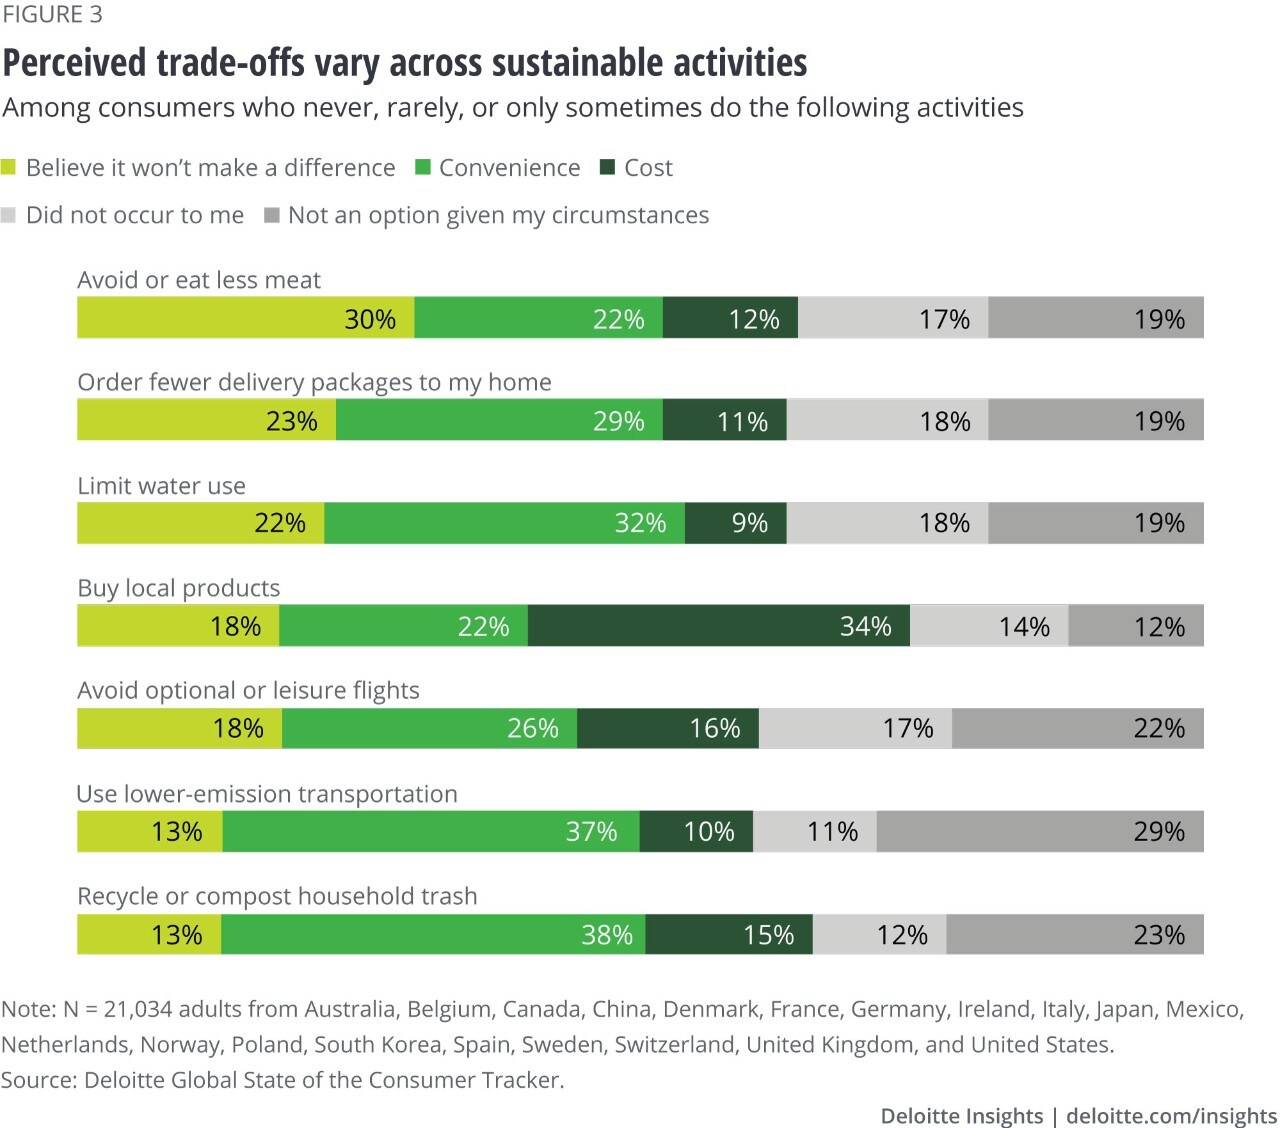 Figure 3. Perceived trade-offs vary across sustainable activities